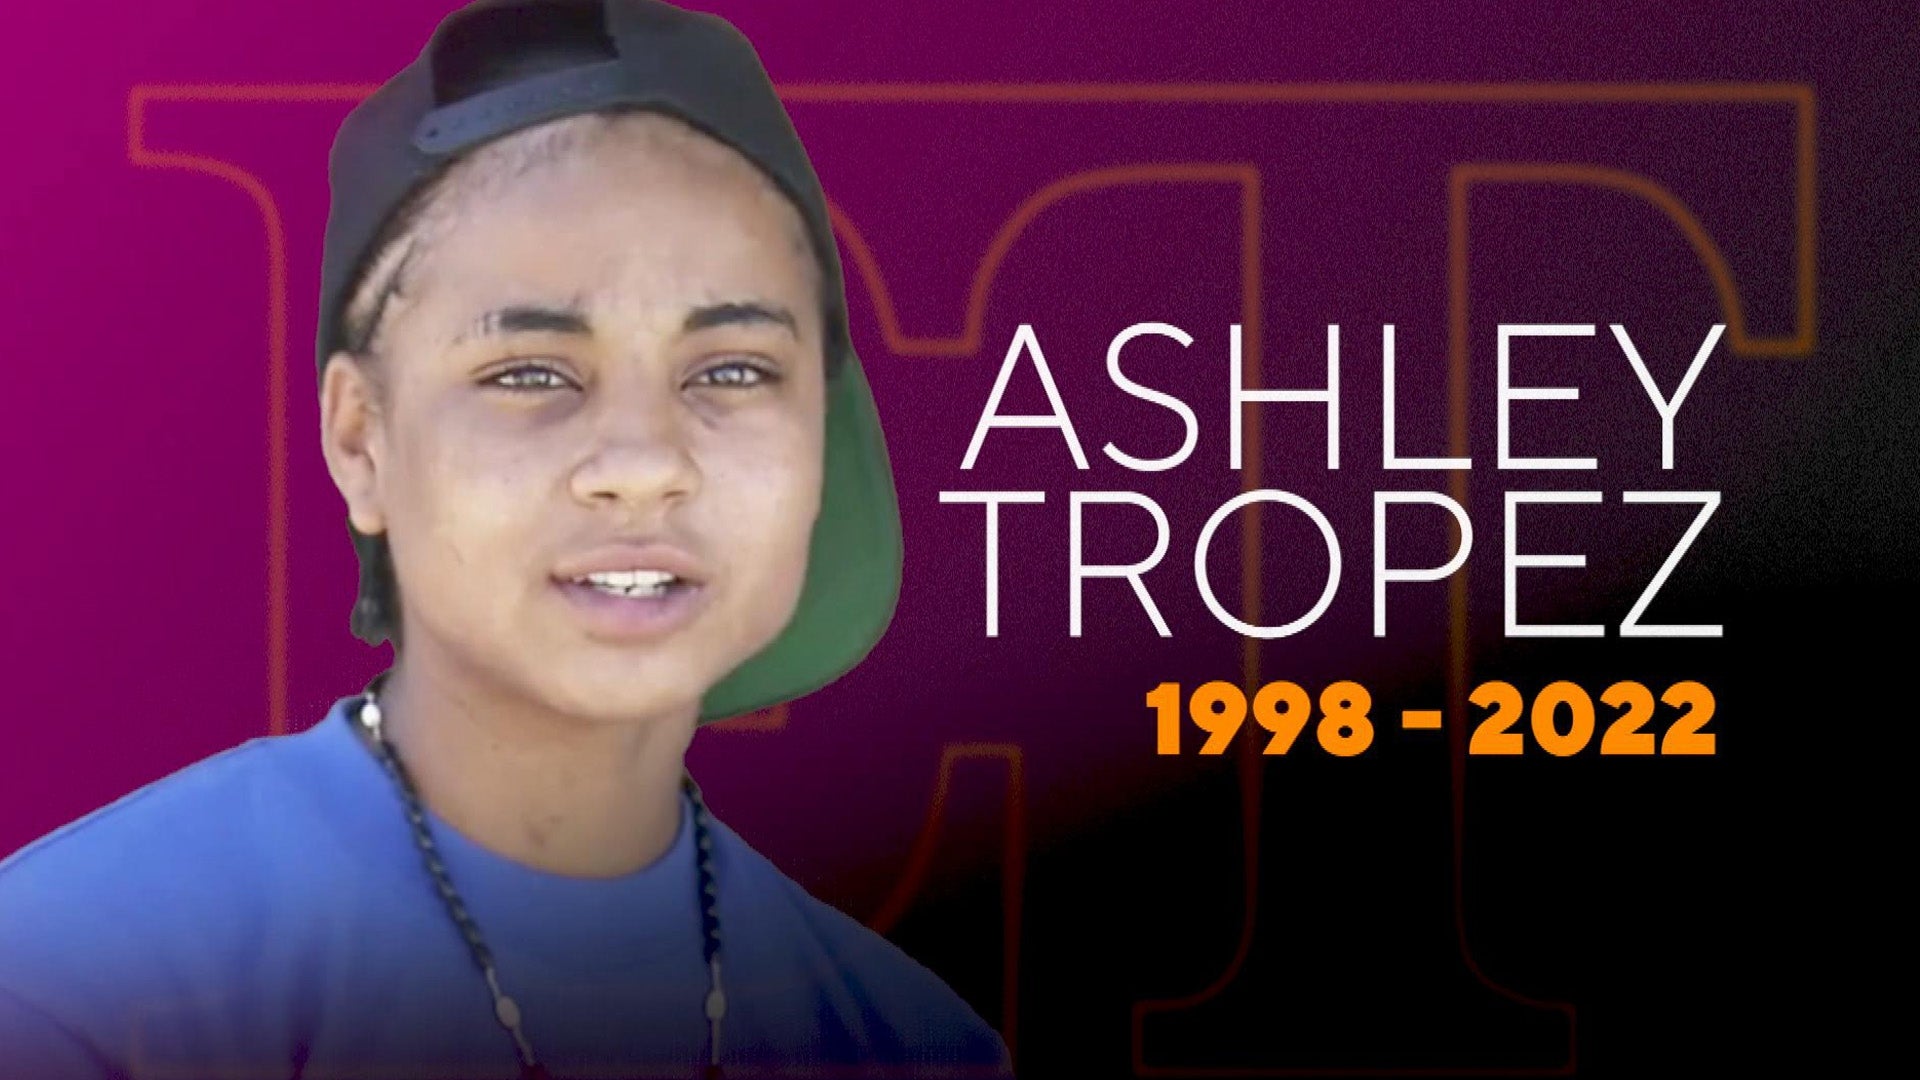 'Beyond Scared Straight's Ashley Tropez Found Dead at 24 With 'Traumatic Injuries'